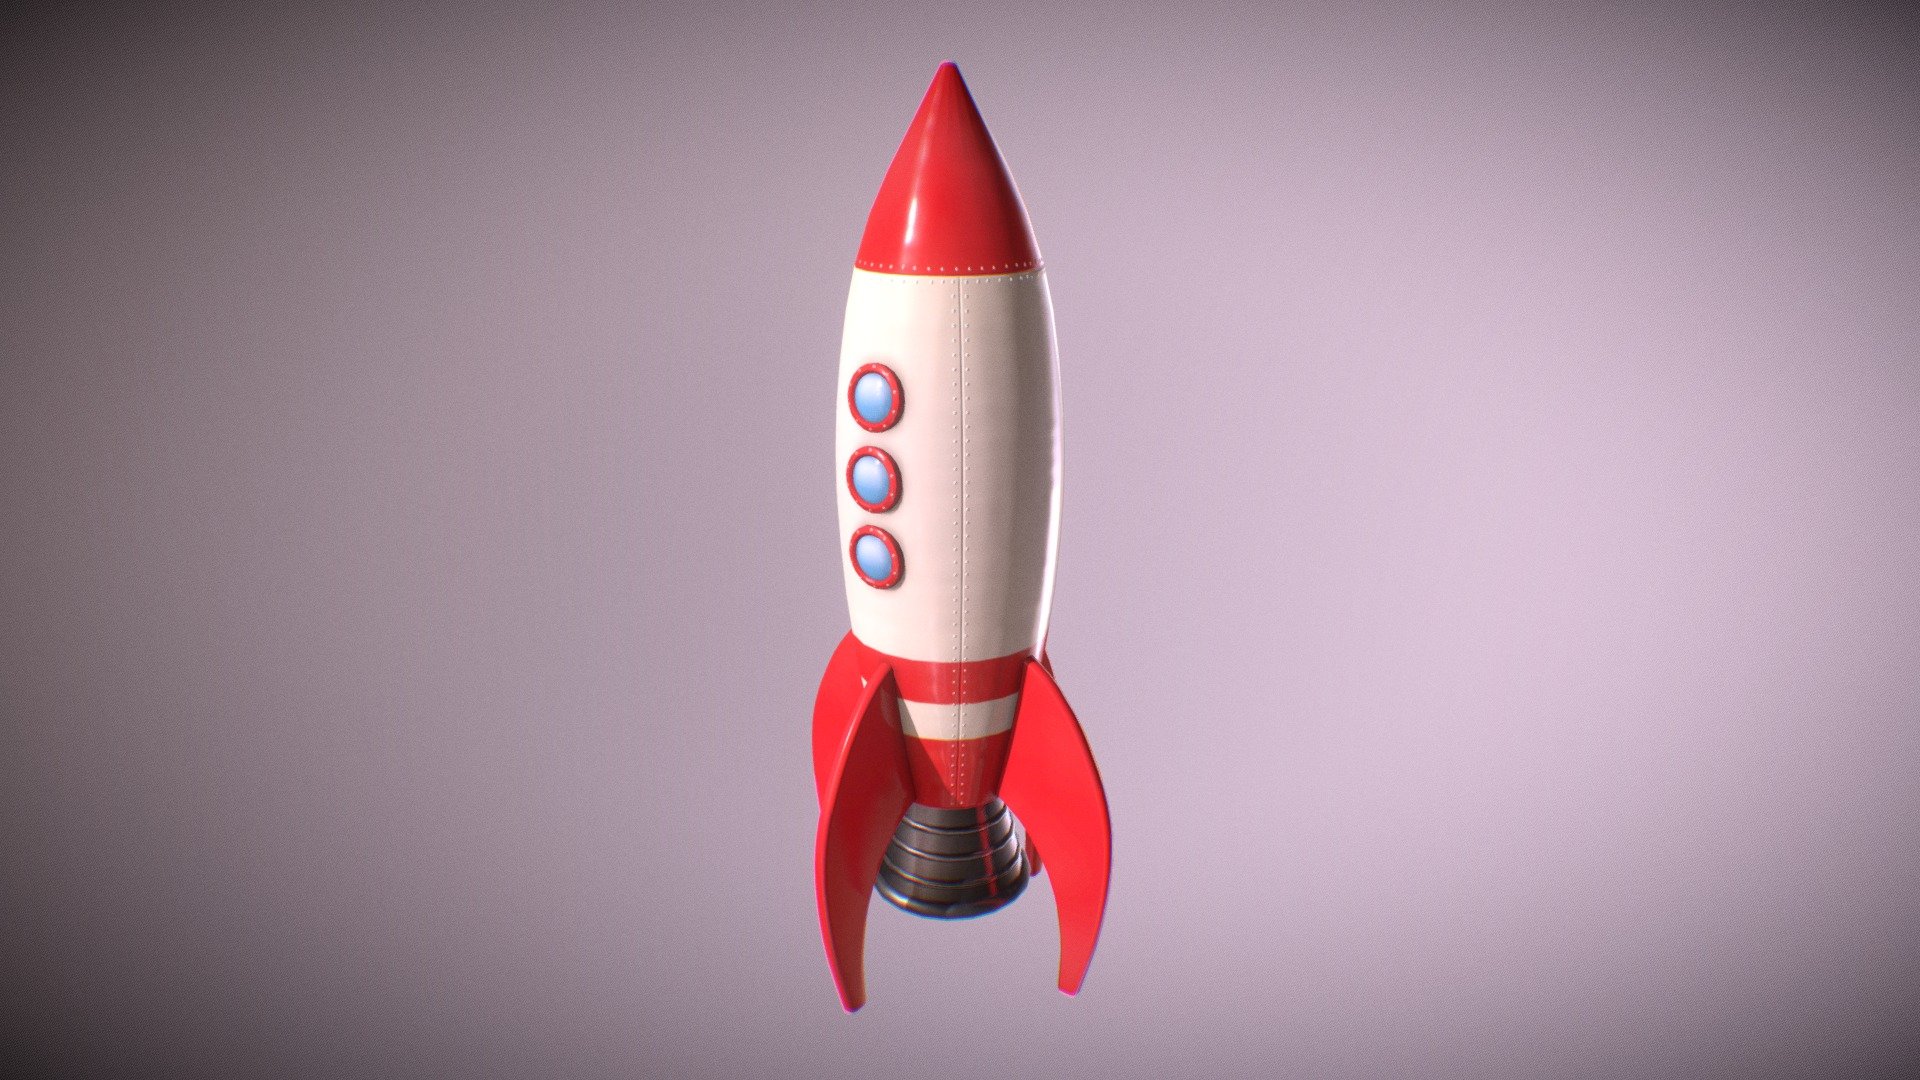 Low-poly PBR Cartoon Rocket model intended for game/realtime/background use.



Model was not intended for subdivision
Real World Scale Measurements
No special plug-ins necessary to use this product 
Quad/Tris only polygon - 2992 count 
Texel density is 23.38 for 4k UV-maps. H = 2.6 meters


Model is included in 4 file formats (Include only geometry with uvs, and texture need add manually)


Maya 2019 
FBX 
OBJ 
GLTF/GLB 2k and 4k file


High quality 4096x4096 resolution textures in PNG:



PBR Maps:
BaseColor, 
AO, 
Roughness, 
Metalness, 
Normal, 
Glossiness, 
Specular. 



Unity maps (+HDRP maps):
Diffuse, 
Normal map, 
MetallicSmoothness,
HDRP mask map.



Unreal Engine 4 maps:
BaseColor, 
Normal, 
OcclusionRoughnessMetallic.


 - Cartoon Rocket PBR - 3D model by en3my71 3d model